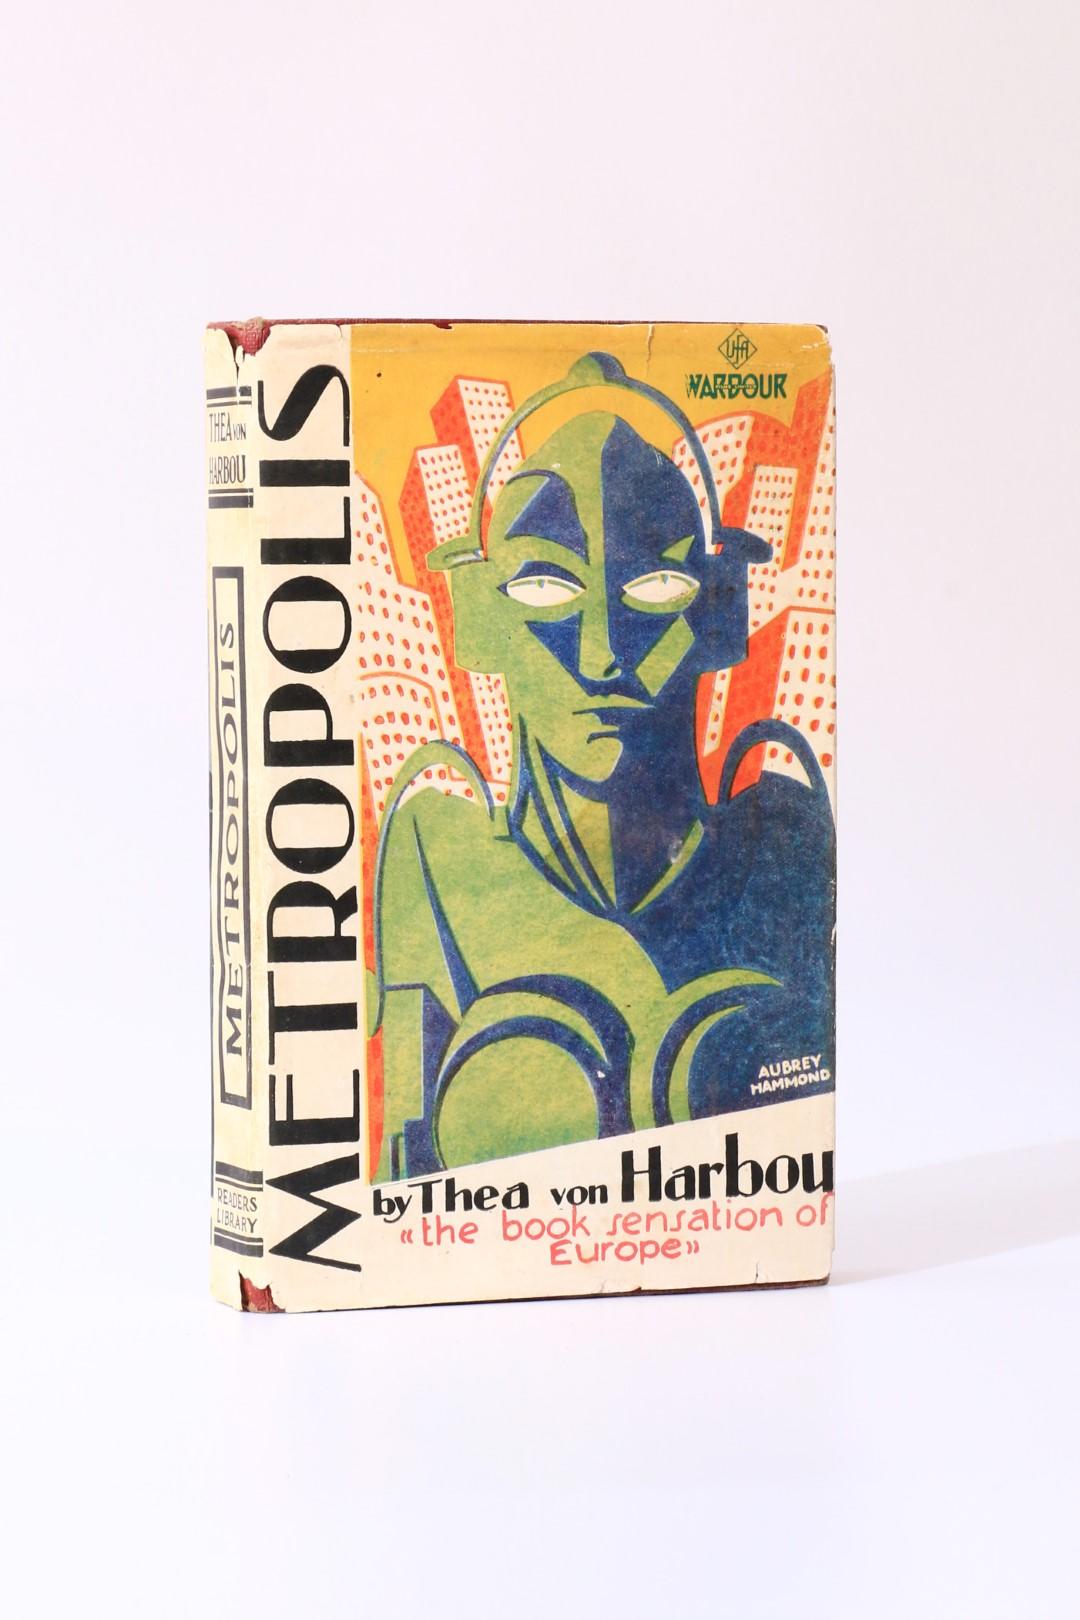 Thea von Harbou - Metropolis - The Readers Library, n.d. [1927], First Edition.